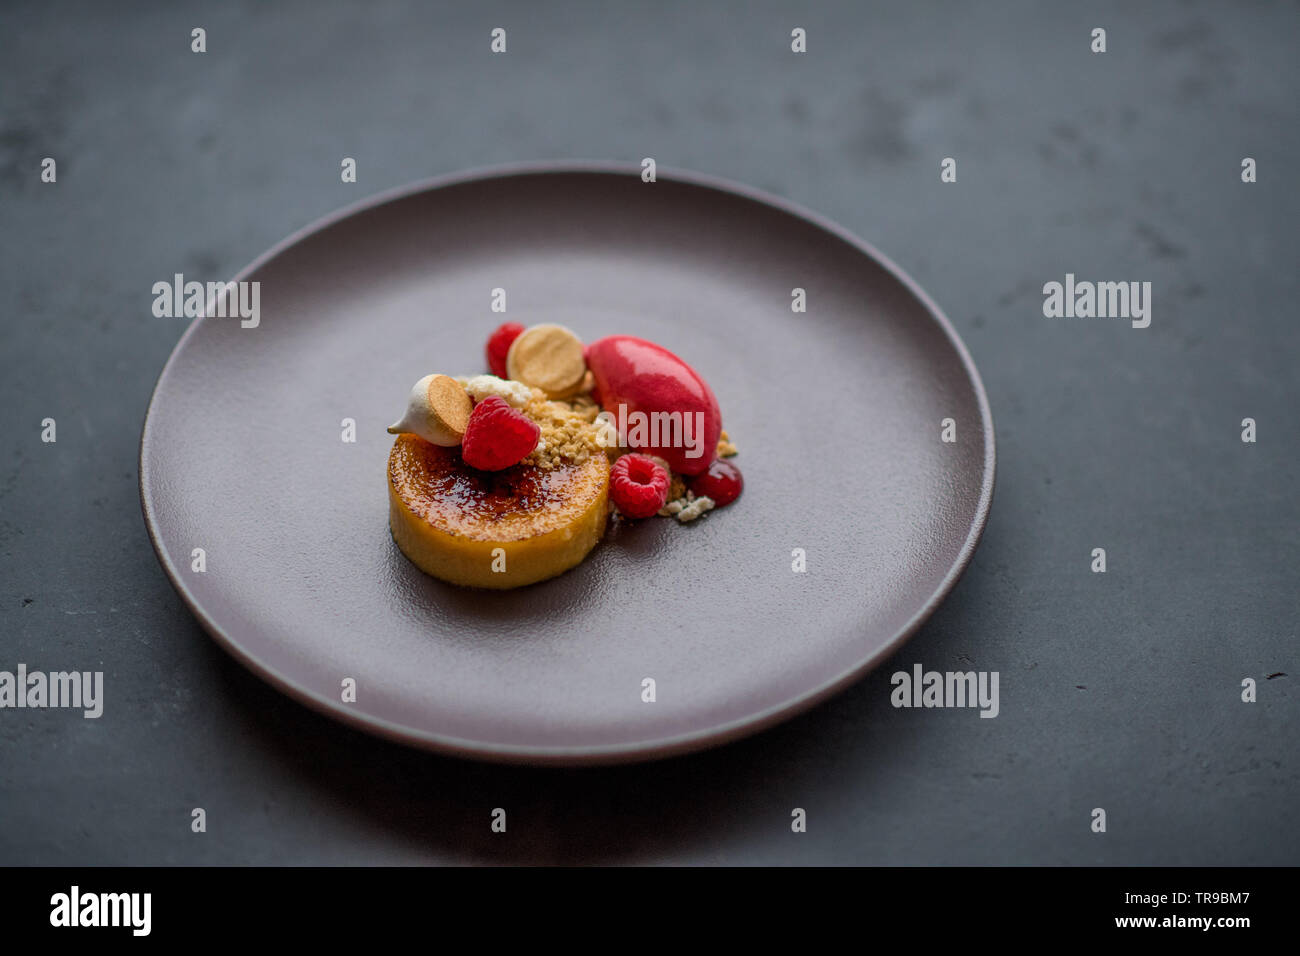 Creme brulee with raspberry, merigne and sorbet Stock Photo